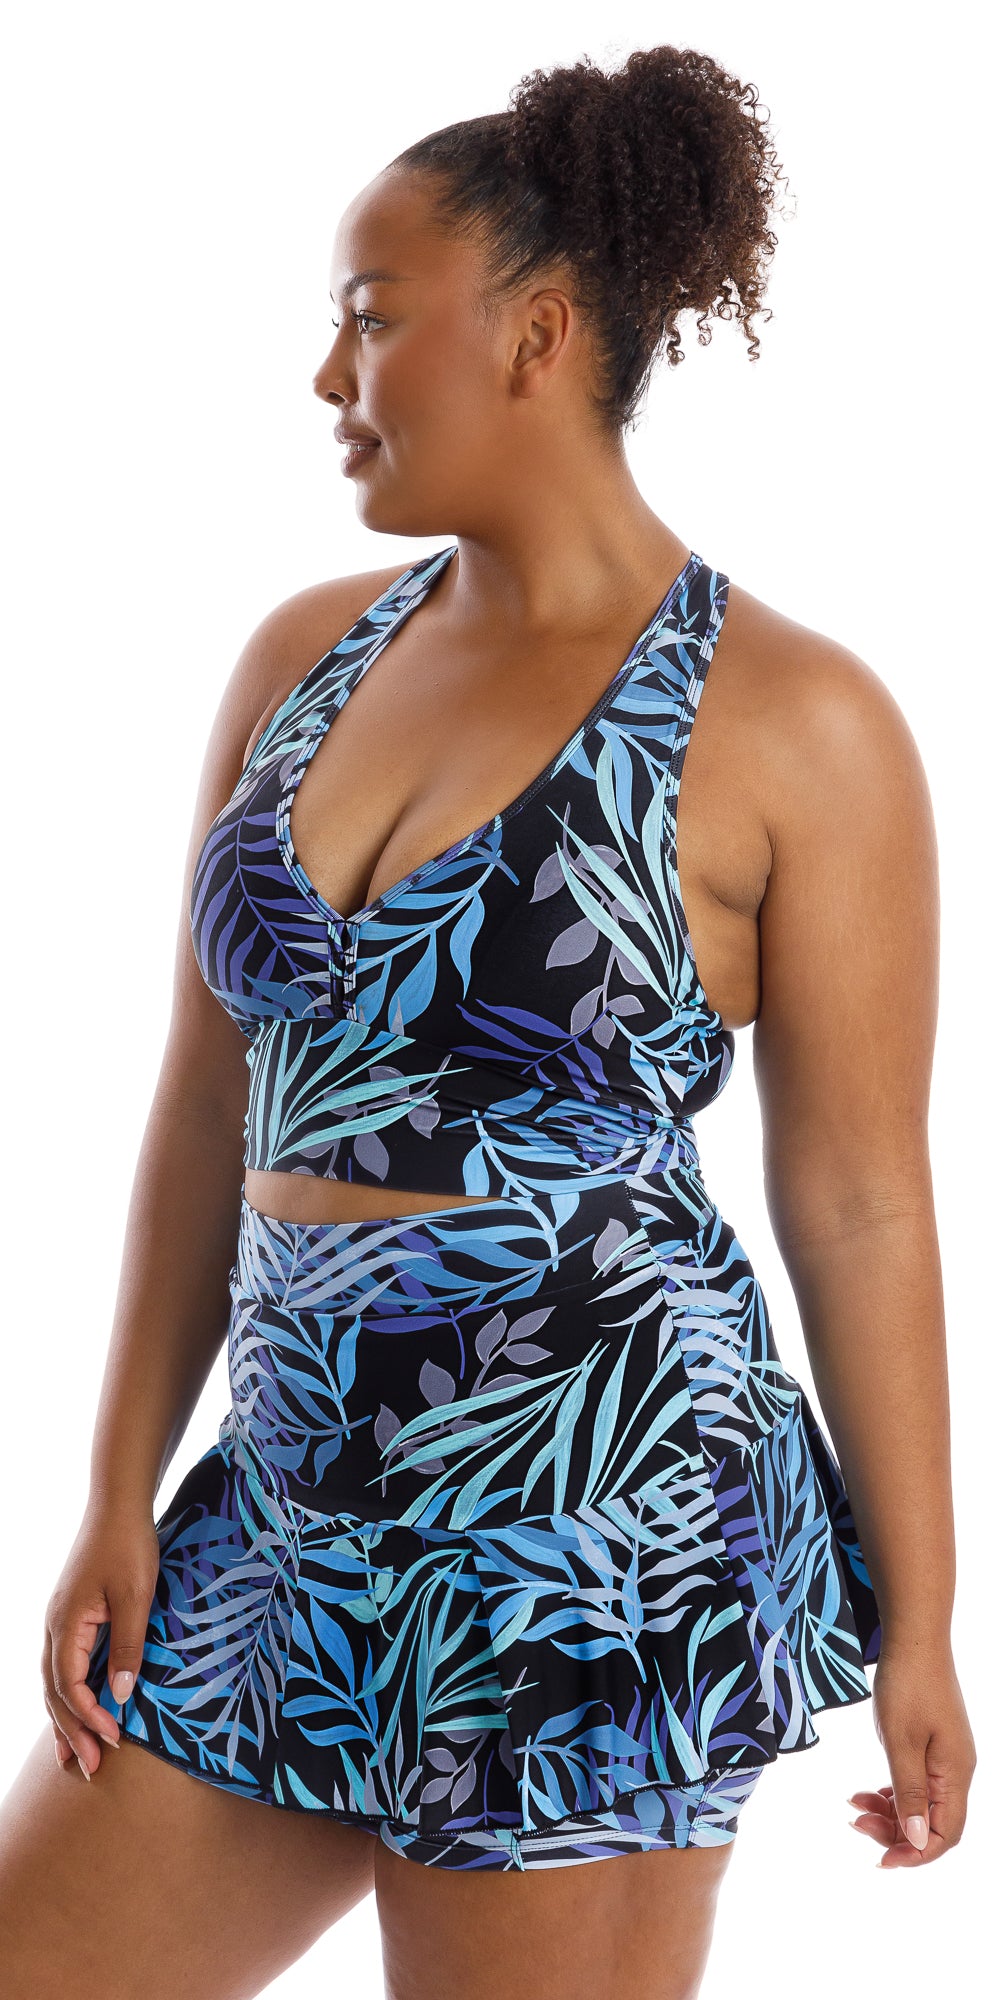 Angled front view of lady in black and blue Tropical Palm Skort with Pockets and matching bra putting one hand on lap while turning head to her right